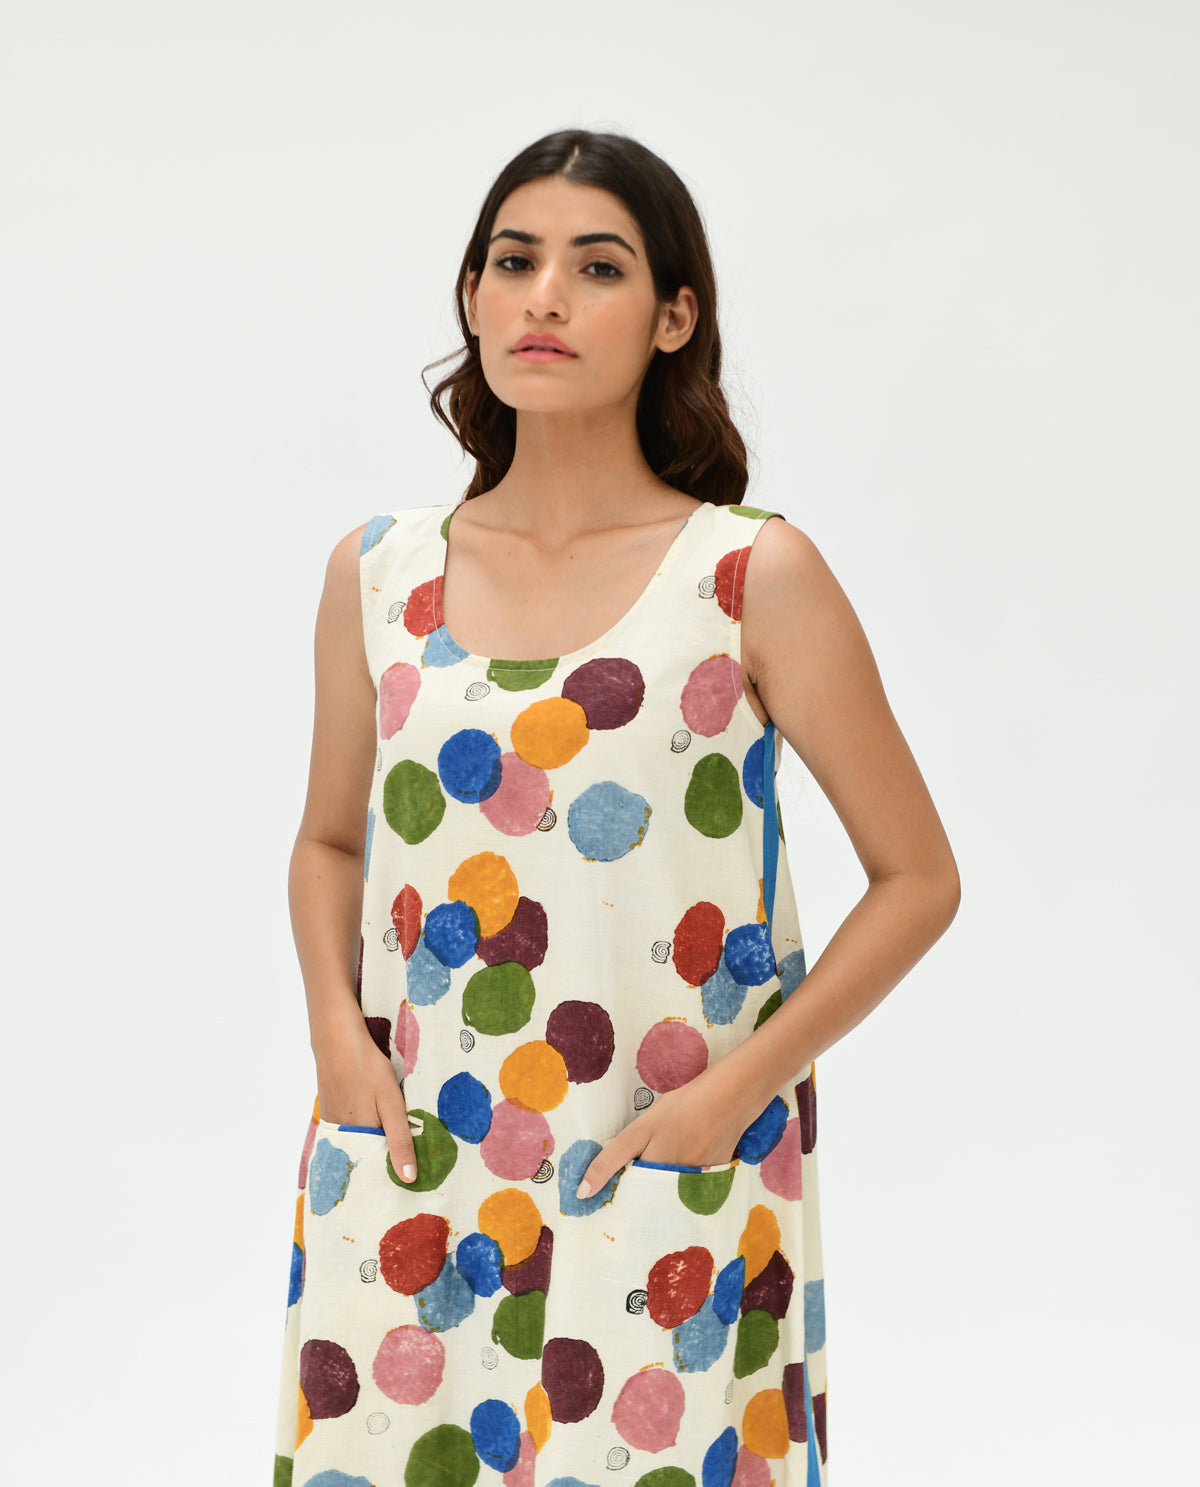 Organic Cotton Pocket Maxi Dress at Kamakhyaa by Rias Jaipur. This item is 100% Organic Cotton, Best Selling, Casual Wear, Handblock Printed, Handspun, Handwoven, Maxi Dresses, Off-White, Polka Dots, Prints, Relaxed Fit, Sleeveless Dresses, Void, Void Polka, Womenswear